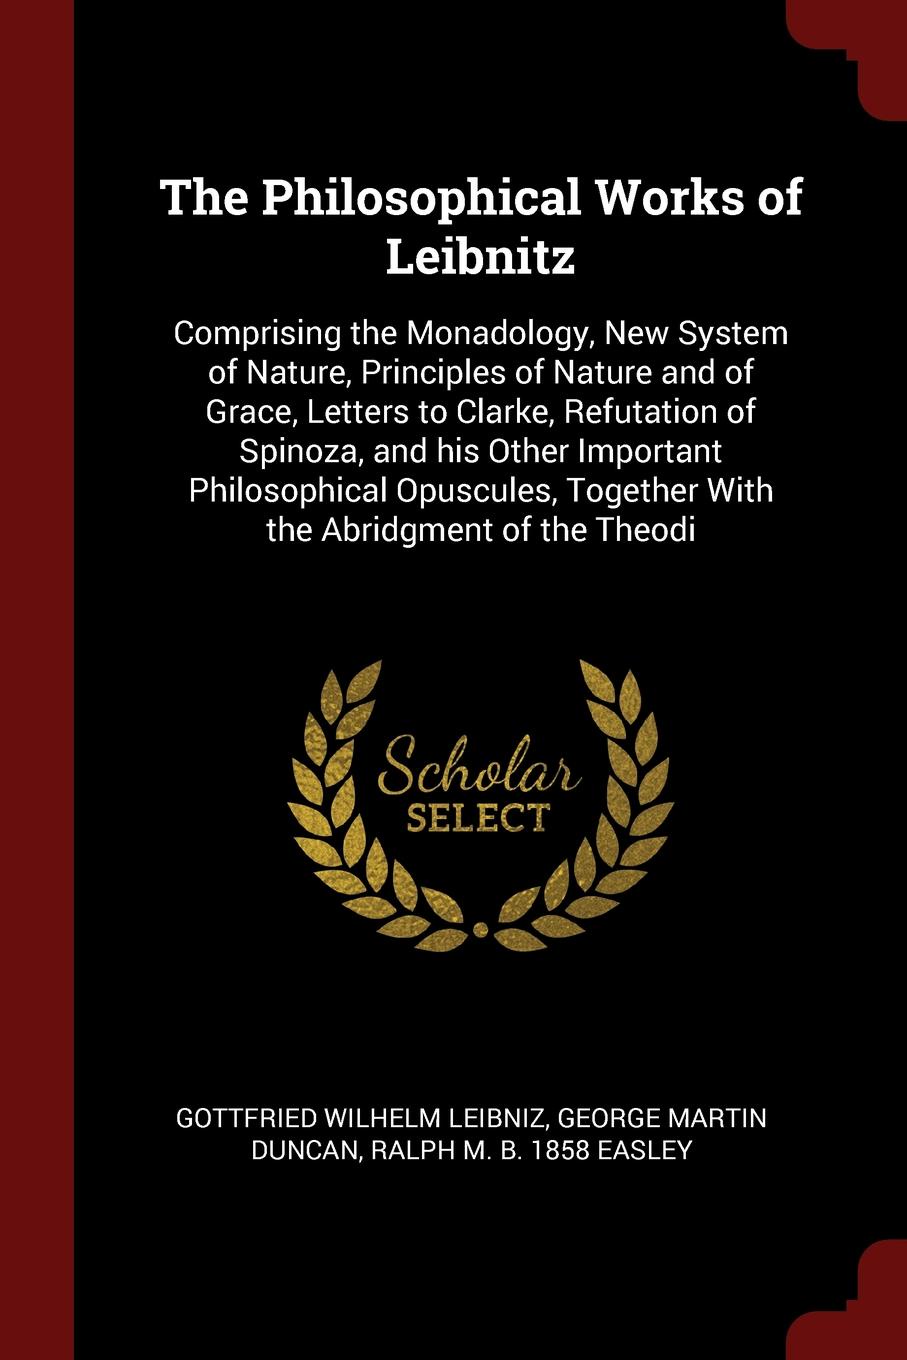 The Philosophical Works of Leibnitz. Comprising the Monadology, New System of Nature, Principles of Nature and of Grace, Letters to Clarke, Refutation of Spinoza, and his Other Important Philosophical Opuscules, Together With the Abridgment of the...